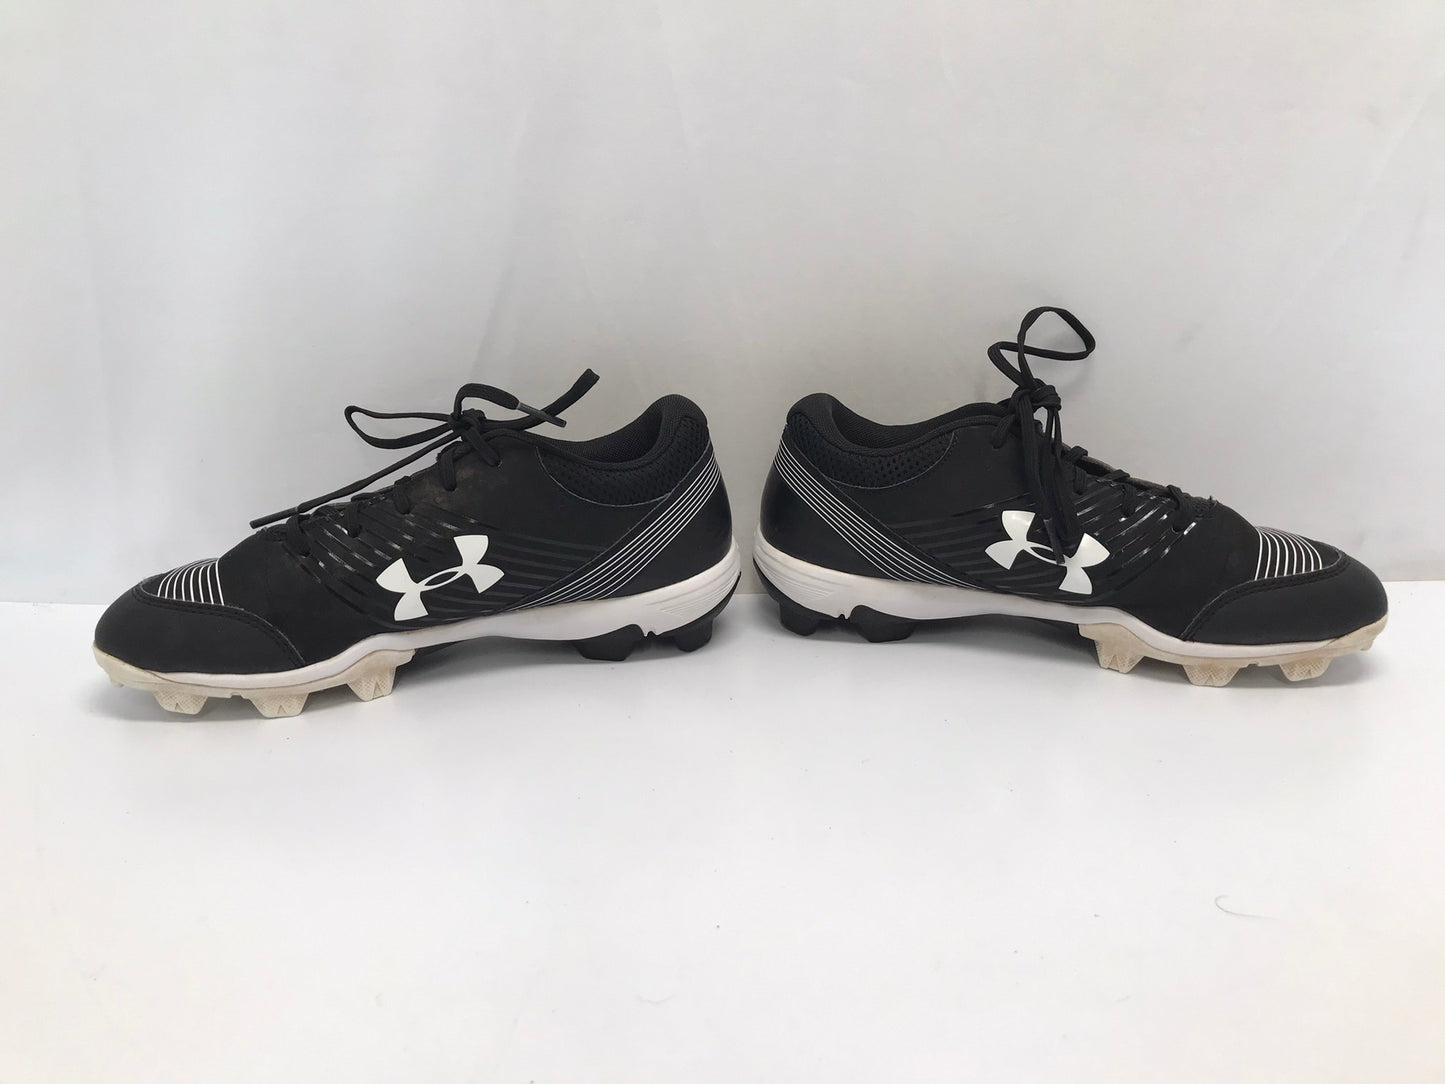 Baseball Shoes Cleats Men's Size 8 Under Armour Black White Grey